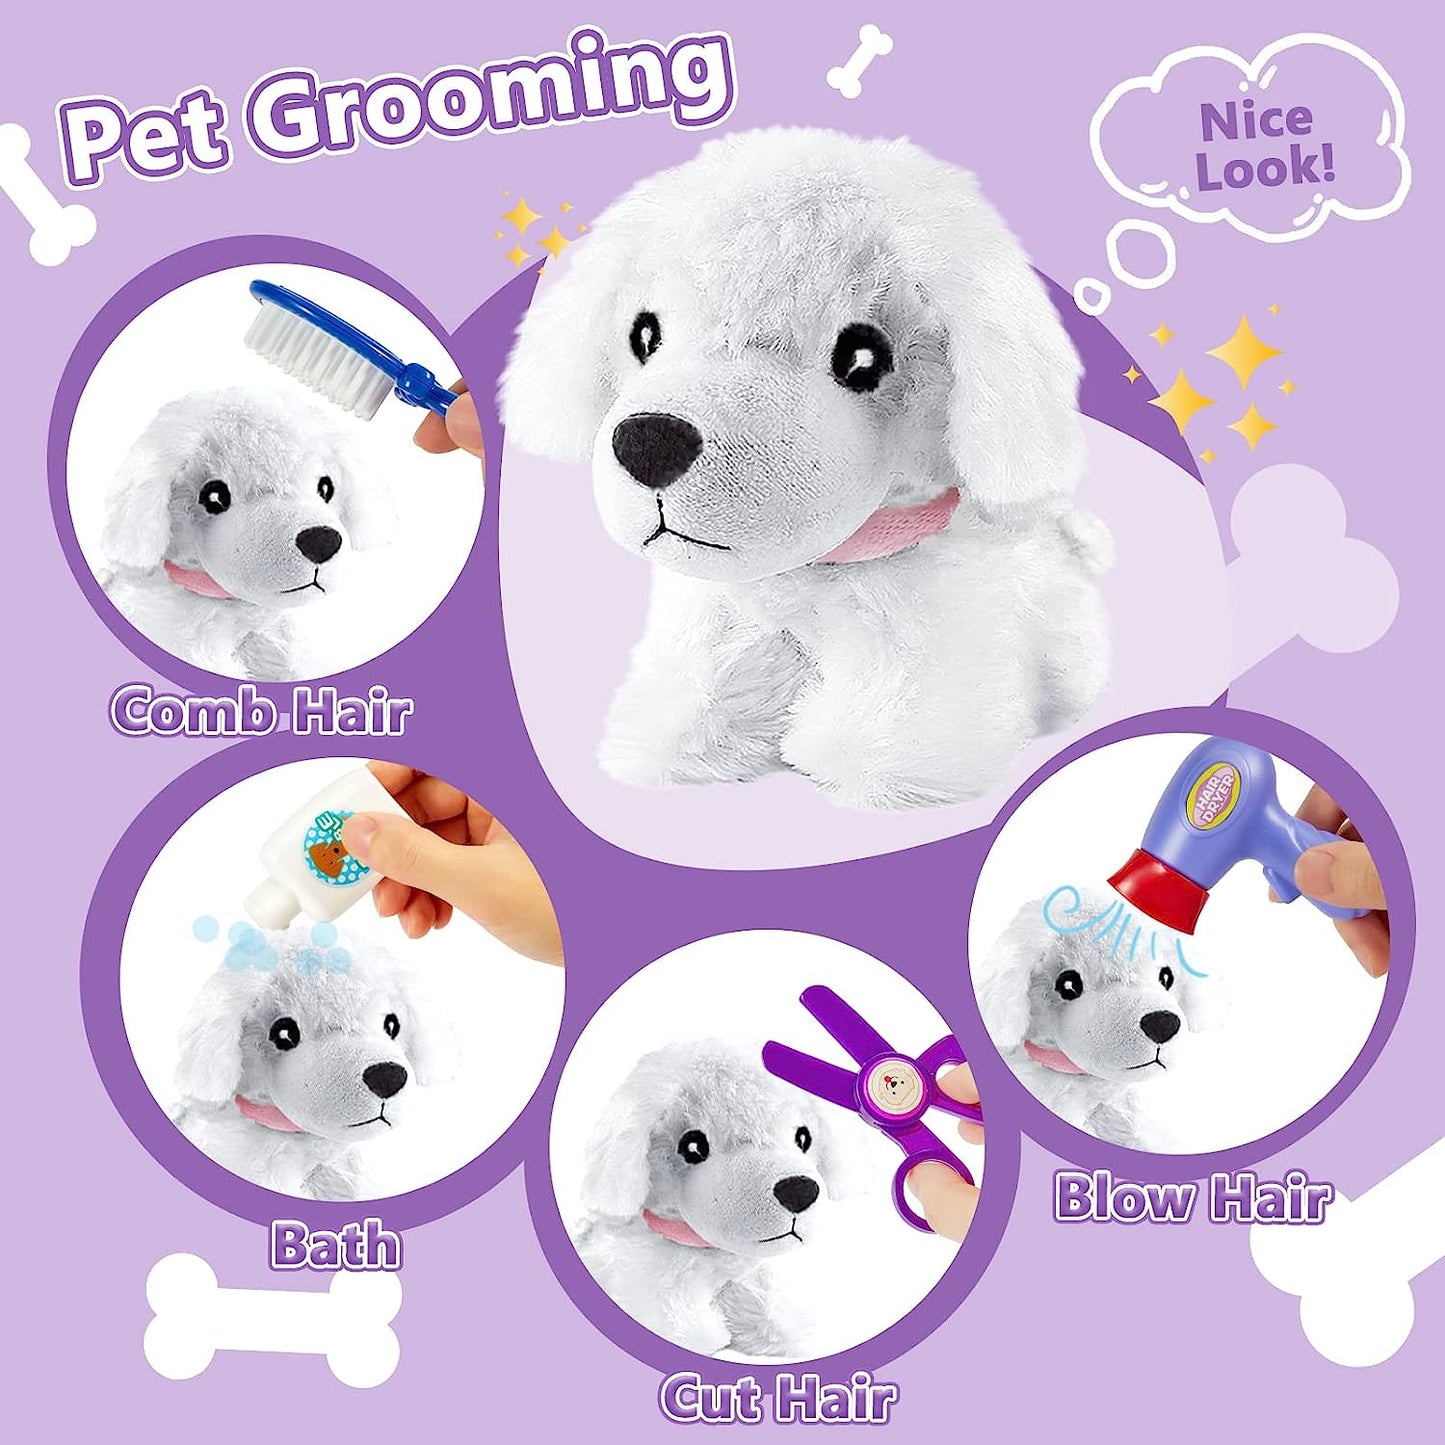 Kids Vet Kit Dog Grooming Toy Pet Care Role Play Games Animal Dolls Pretend Play Pet Carrier Set Toys 3 4 5 Year Old Girls Boys Children Gifts